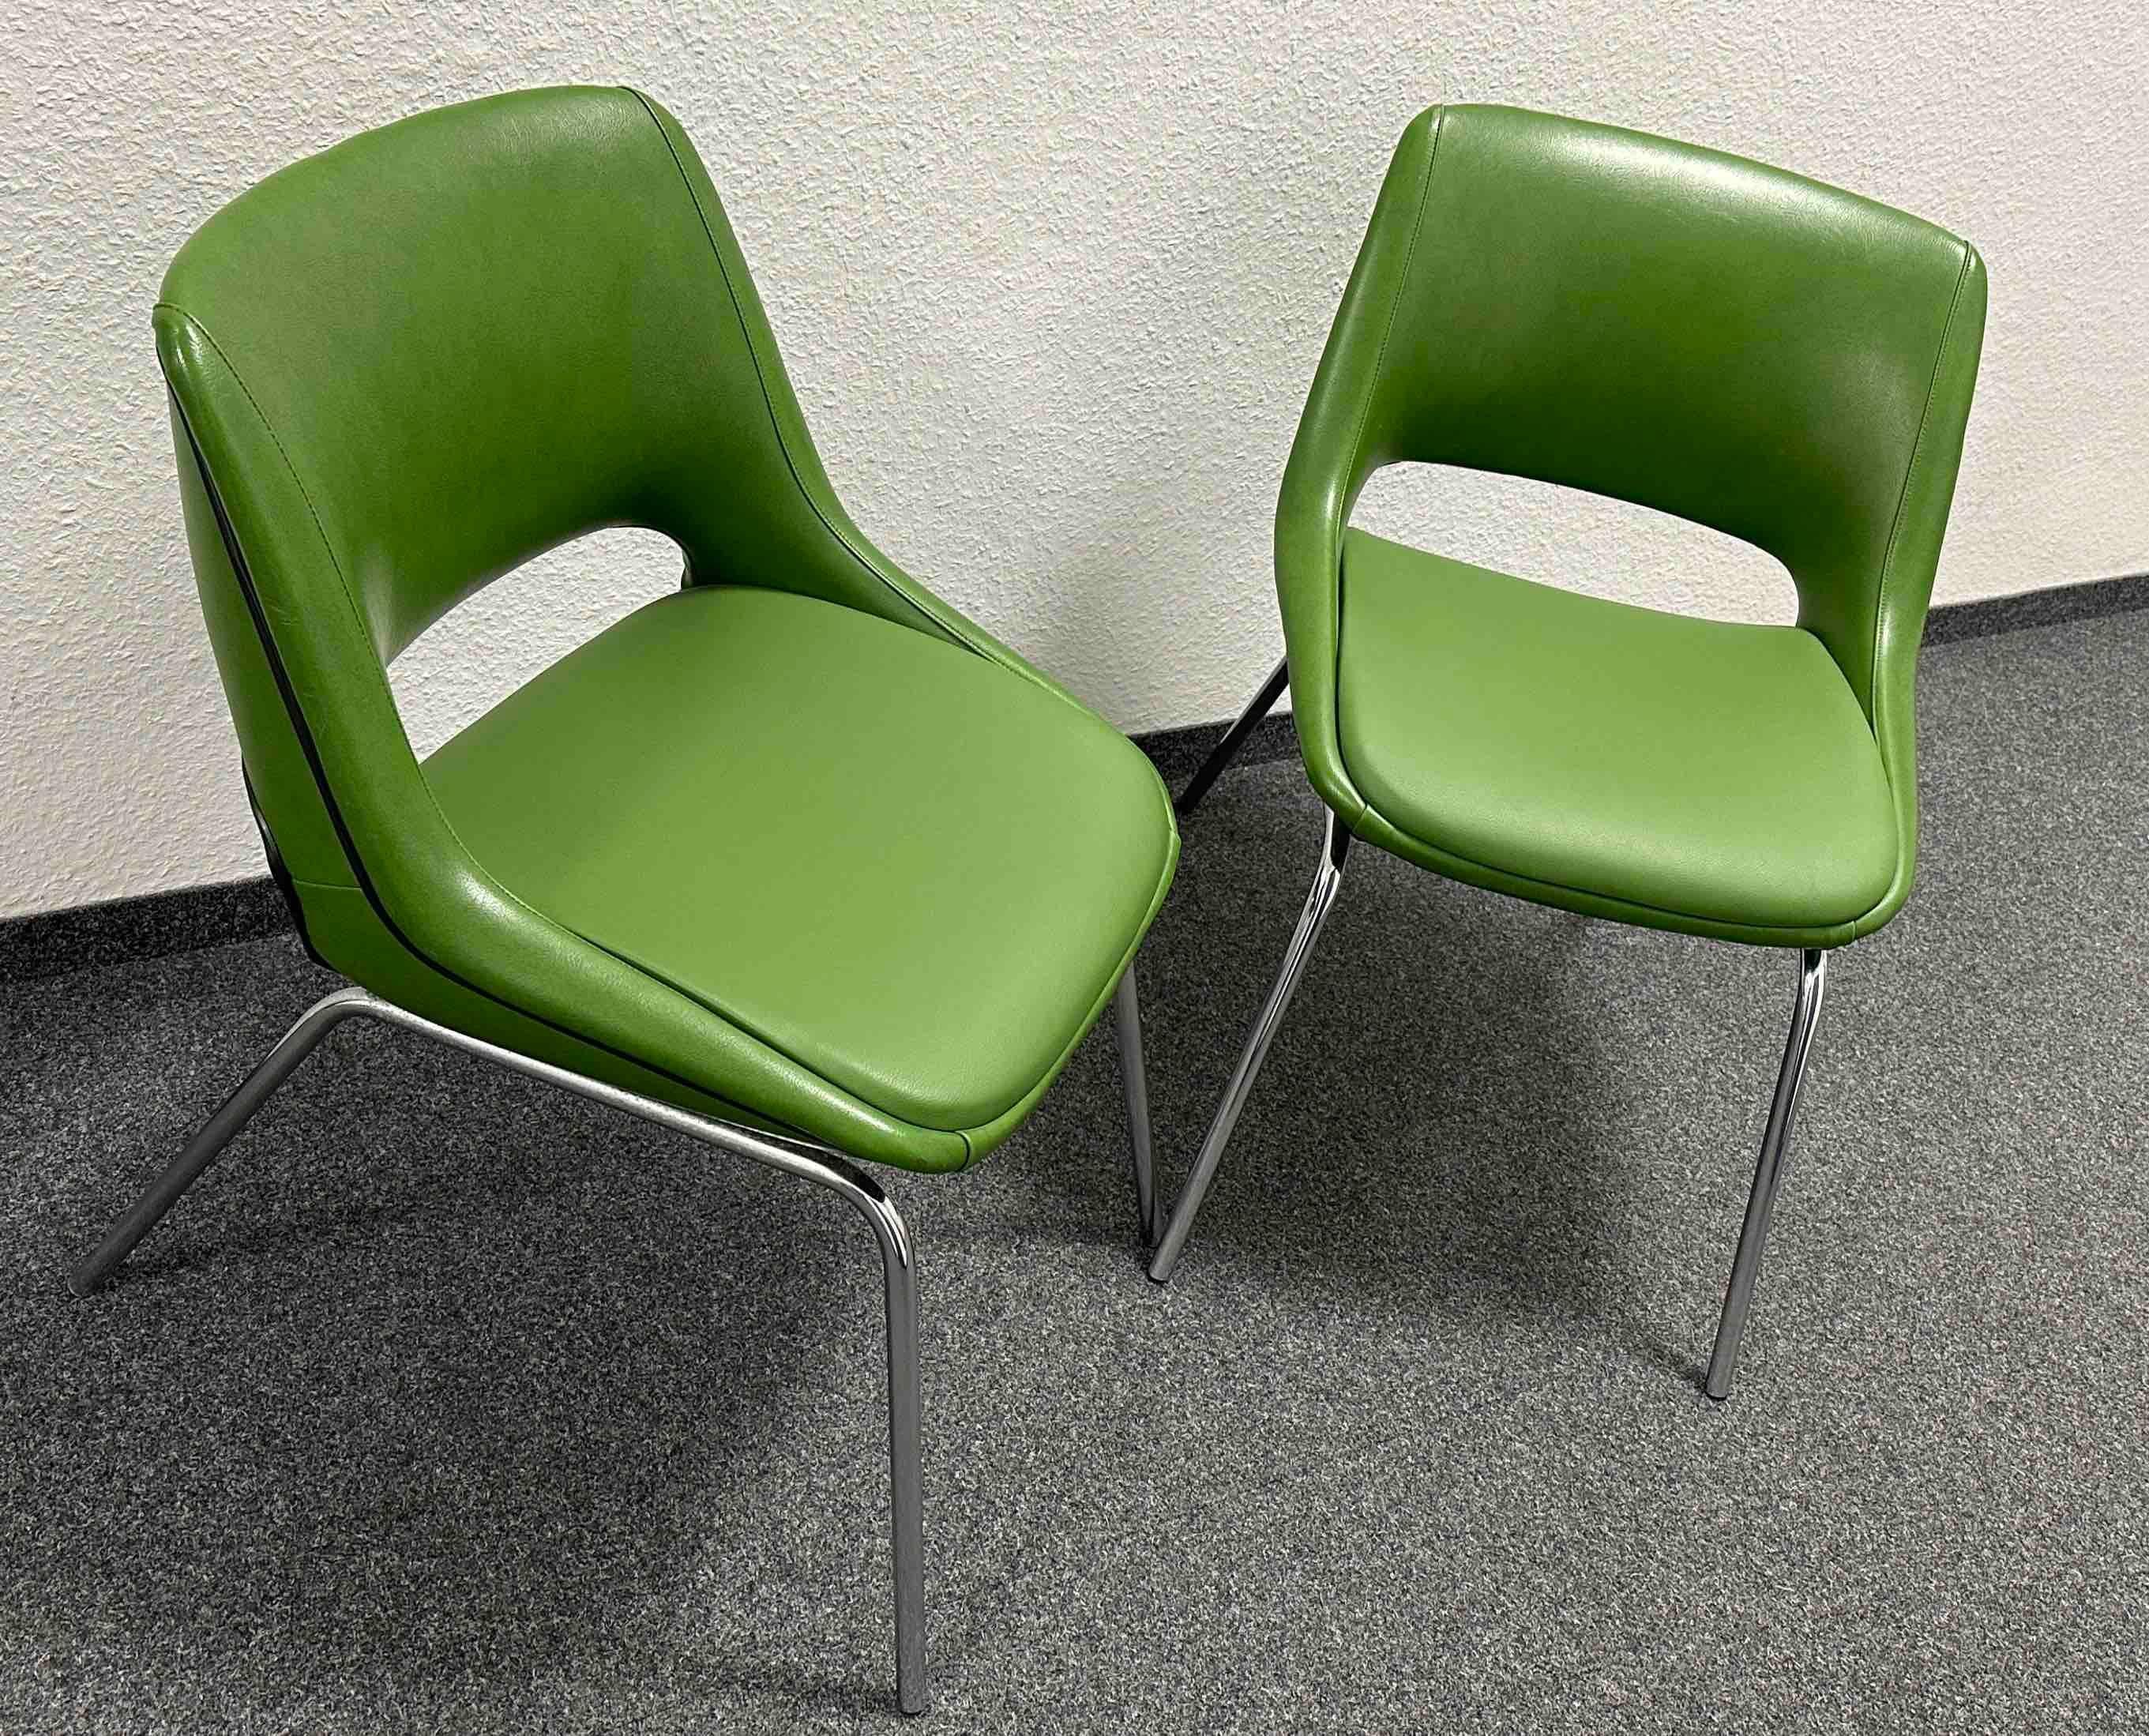 Two Chrome Base, Green Faux Leather Chairs Made by Blaha, Austria, 1970s For Sale 10